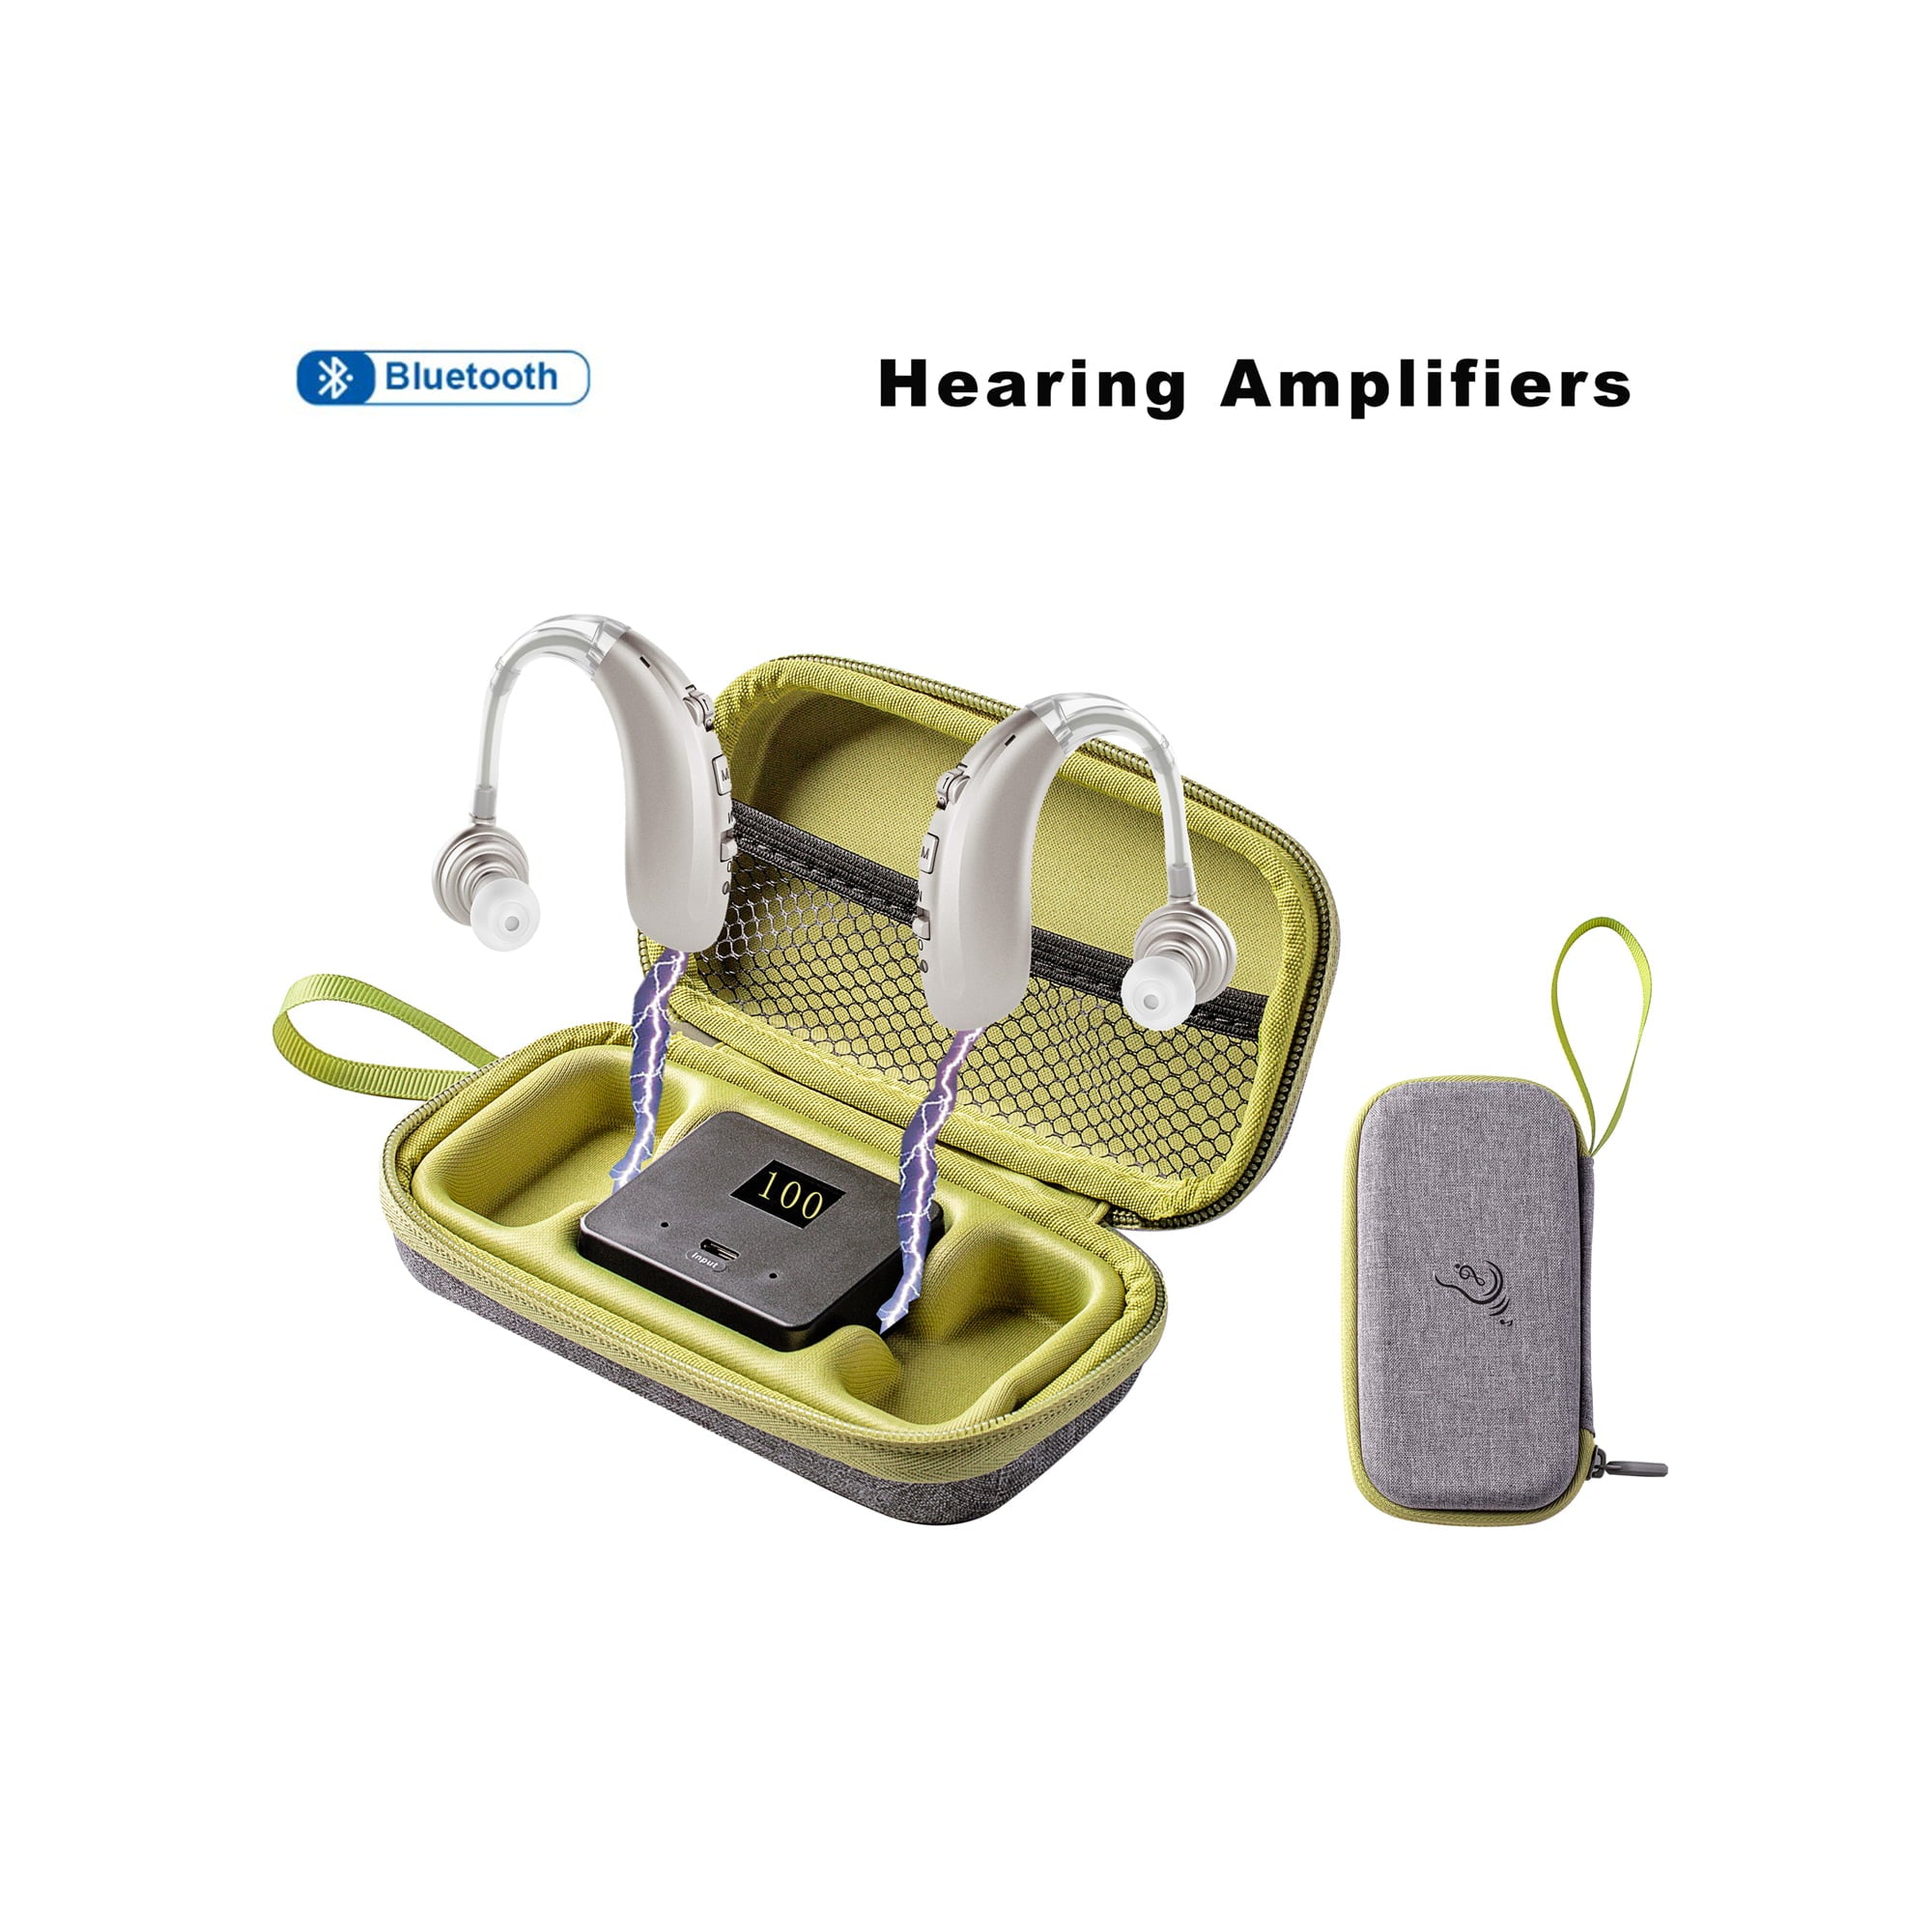 Doosl Bluetooth Hearing Aids, Rechargeable Hearing Amplifiers with Charging Case & Adjustable Modes, Personal Hearing Assist for Seniors Adults, 2 Pack